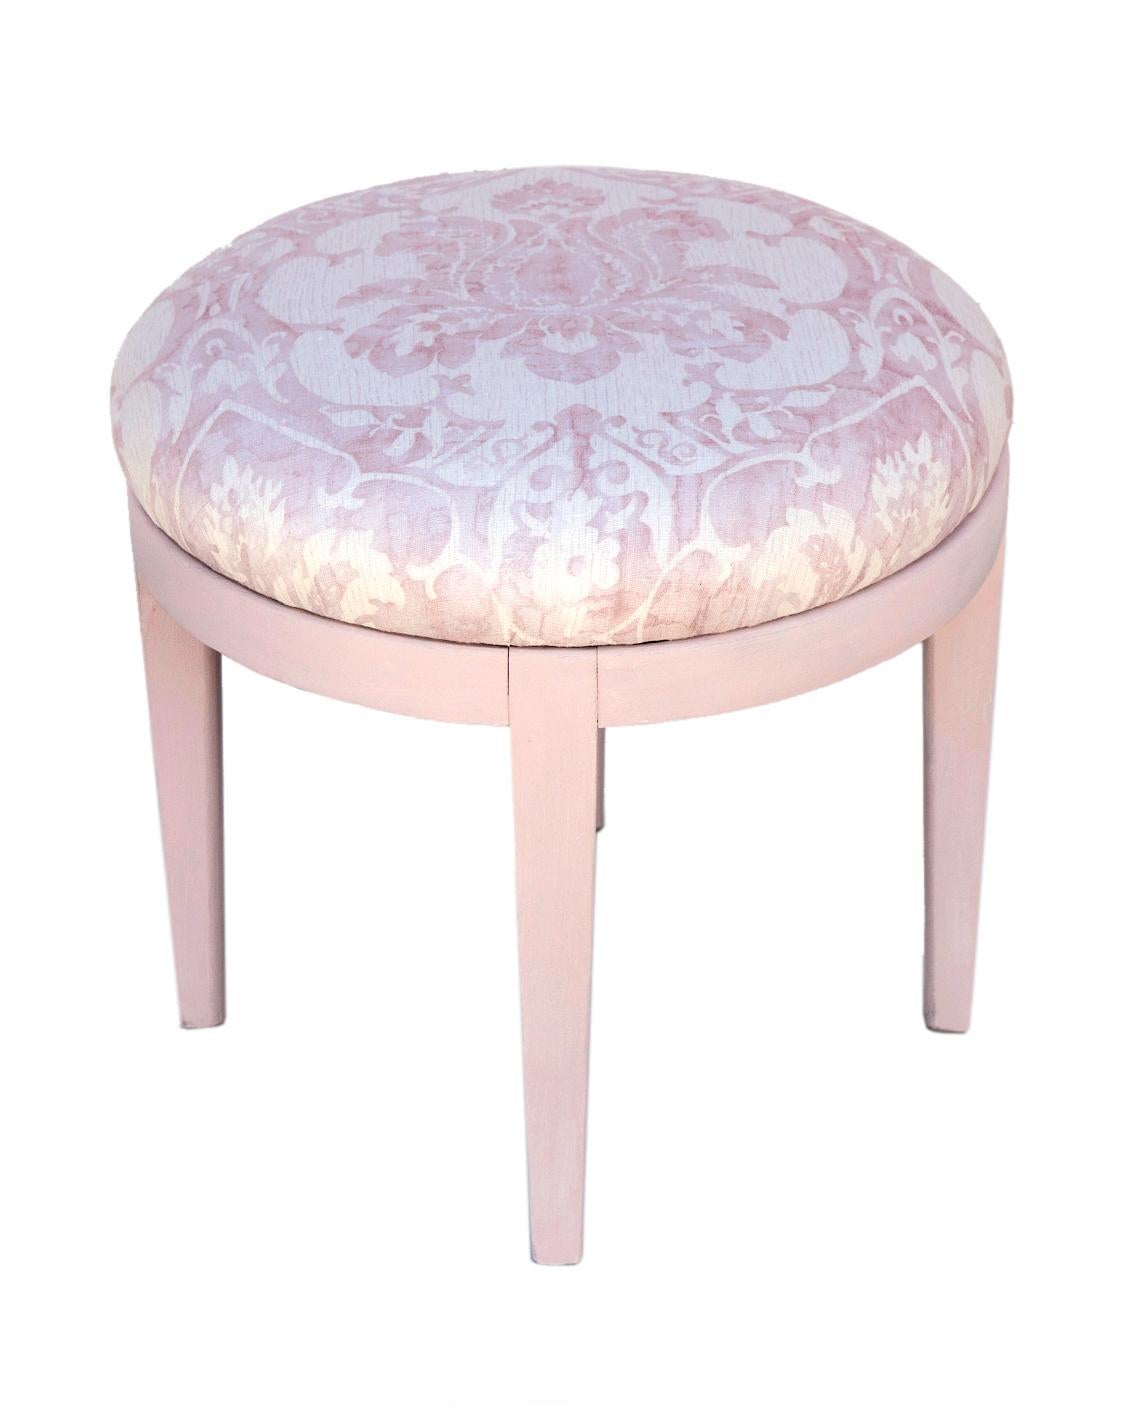 Early mid century hardwood vanity stool. Atop the hand-painted blonde hardwood base, in multi shades of lilac & cream sits a soft-upholstered rounded seat fine French linen.